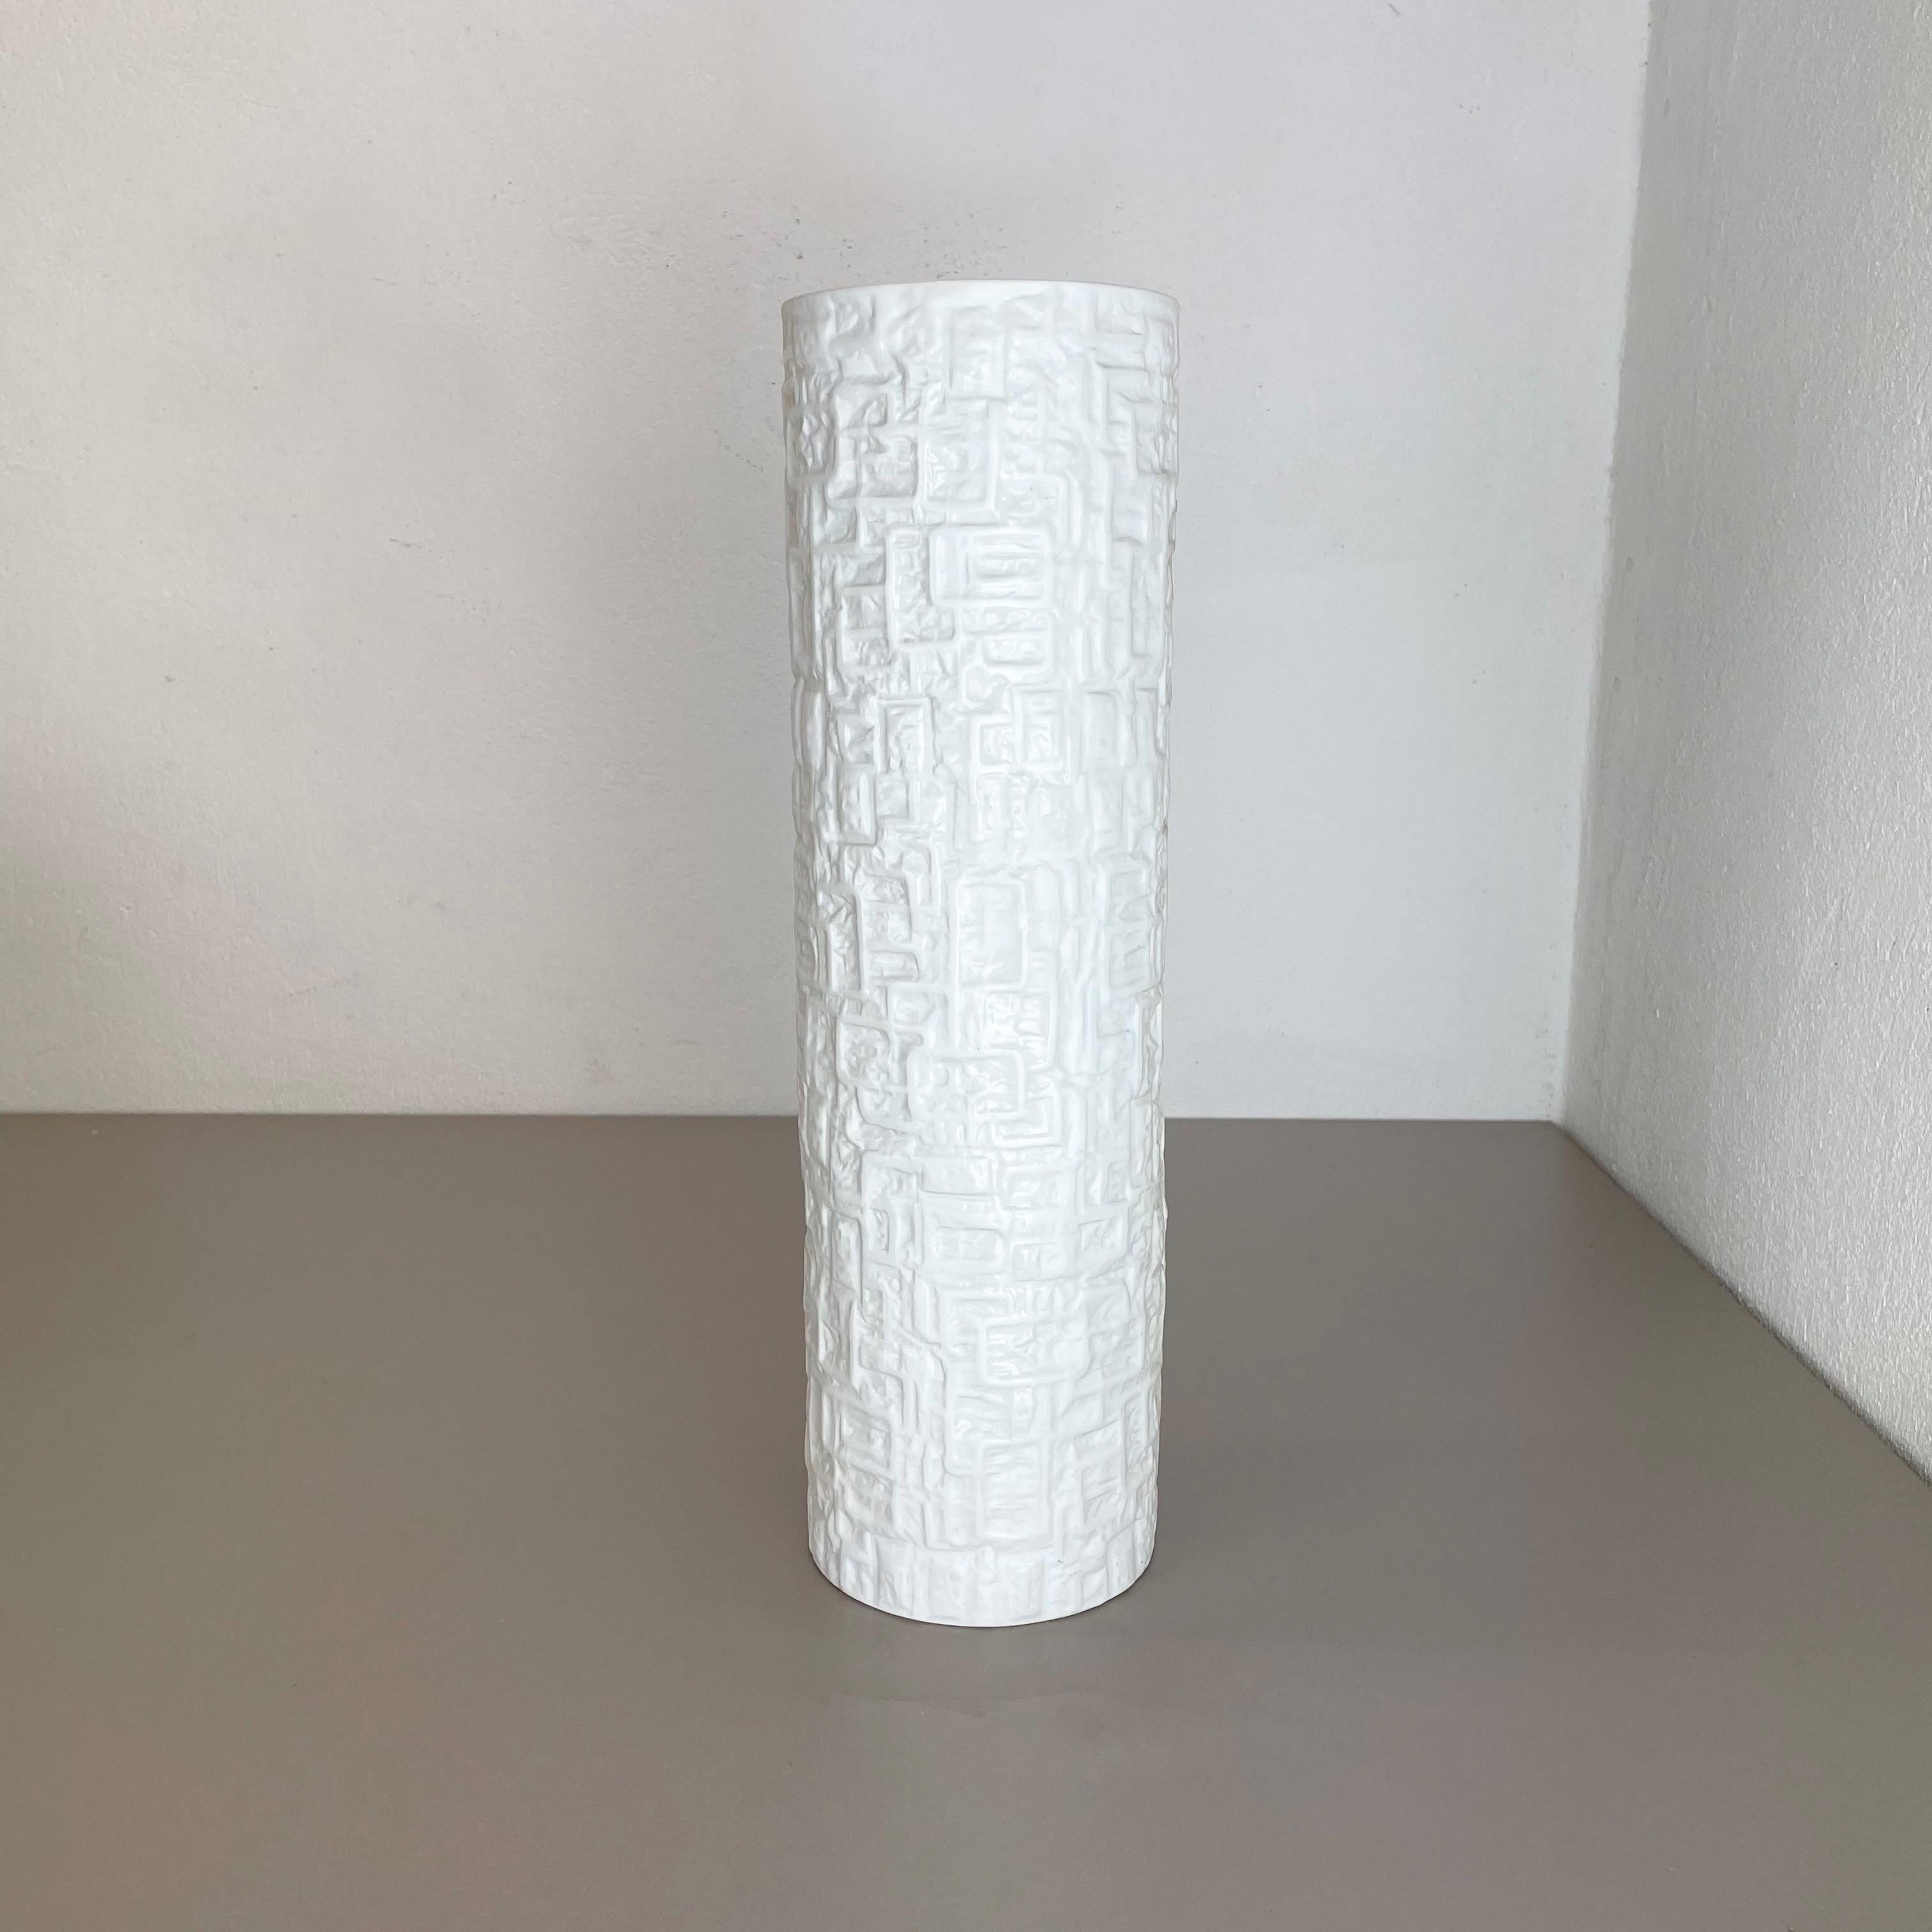 Article:

OP Art Porcelain vase


Producer:

Rosenthal, Germany


Designer:

Martin Freyer




Decade:

1970s




This original vintage OP Art vase was produced in the 1970s in Germany. It is made of porcelain with an OP ART